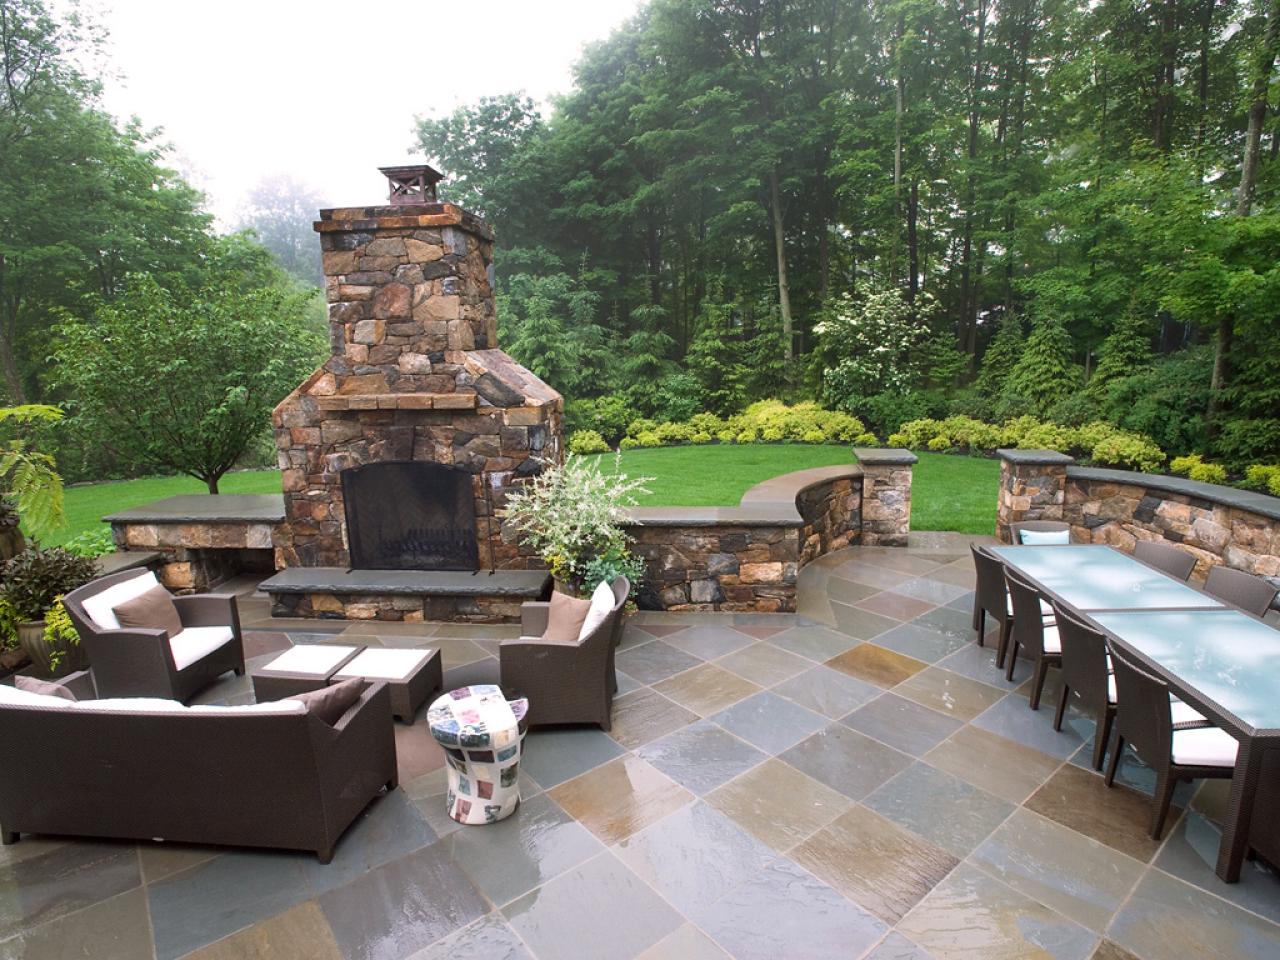 Patio Design & Installation-Richardson TX Landscape Designs & Outdoor Living Areas-We offer Landscape Design, Outdoor Patios & Pergolas, Outdoor Living Spaces, Stonescapes, Residential & Commercial Landscaping, Irrigation Installation & Repairs, Drainage Systems, Landscape Lighting, Outdoor Living Spaces, Tree Service, Lawn Service, and more.